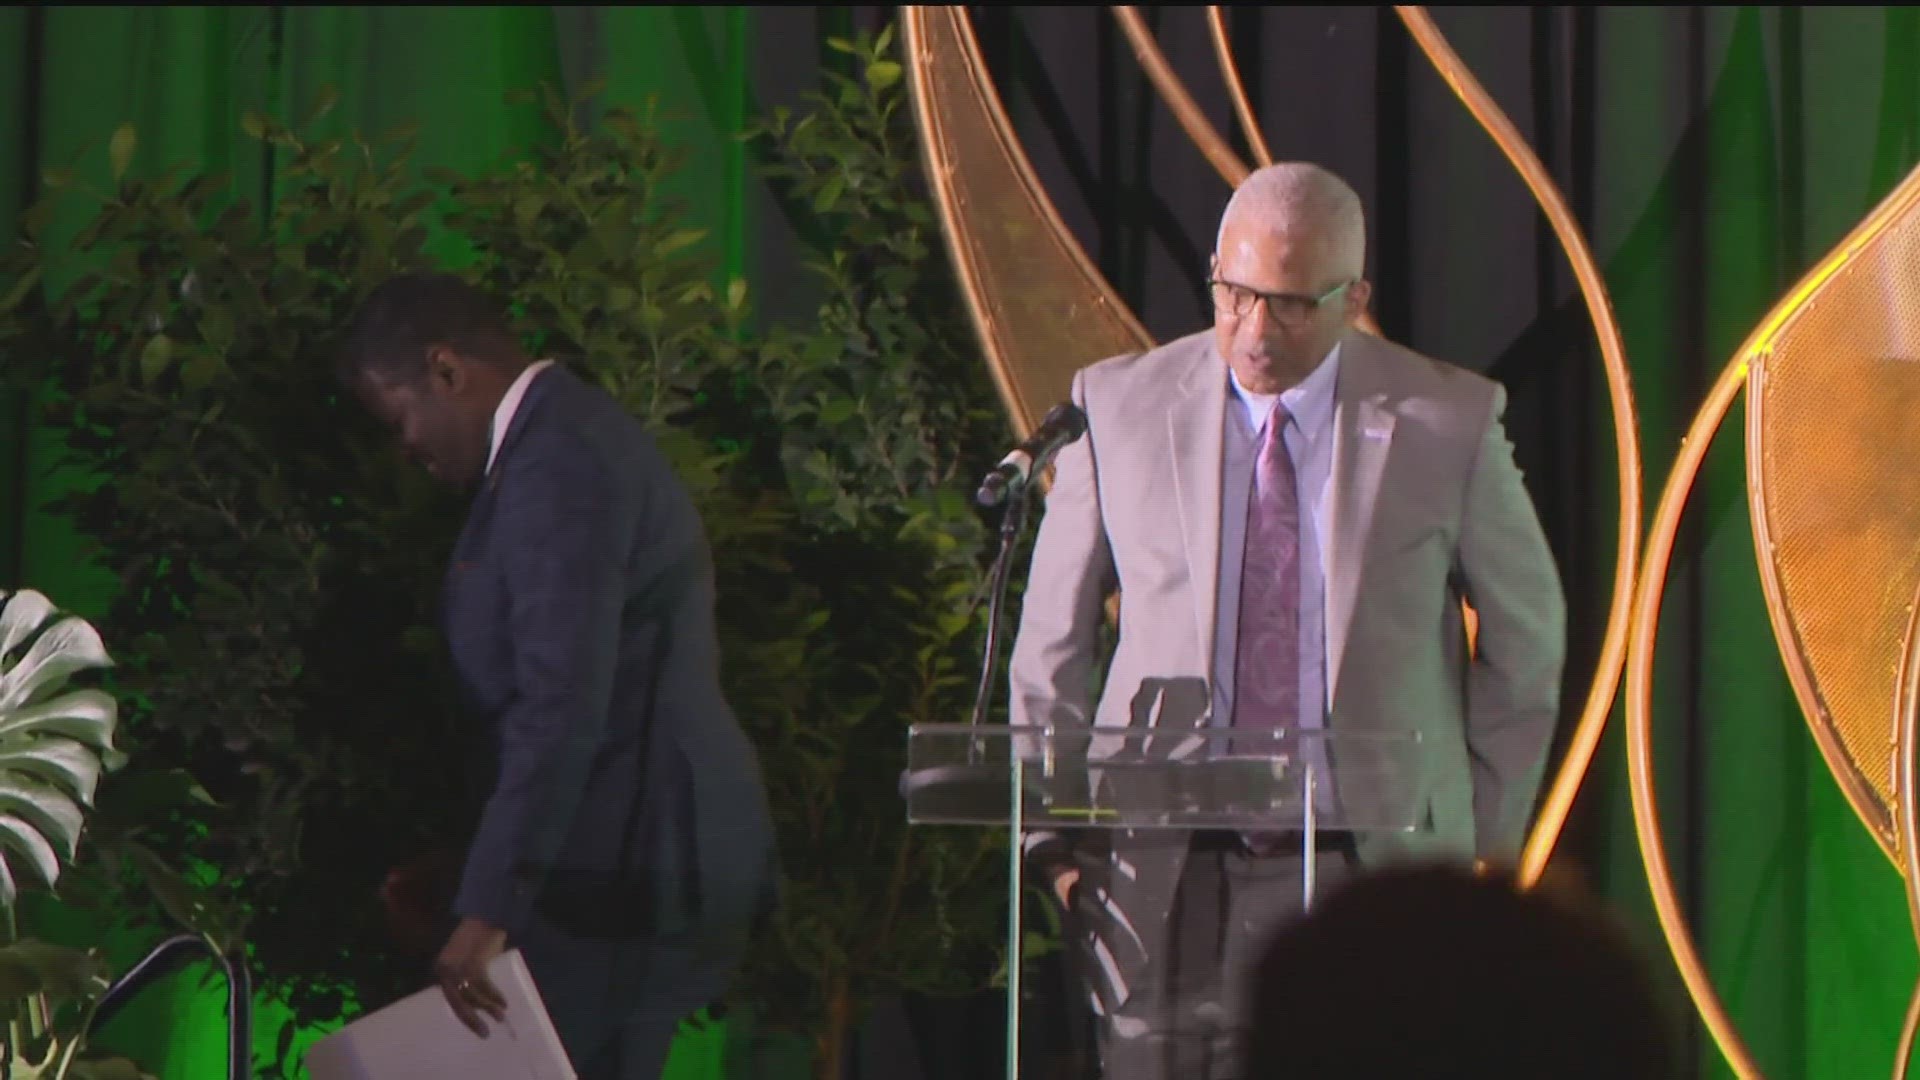 11Alive's Chesley McNeil presented the awards on Tuesday.